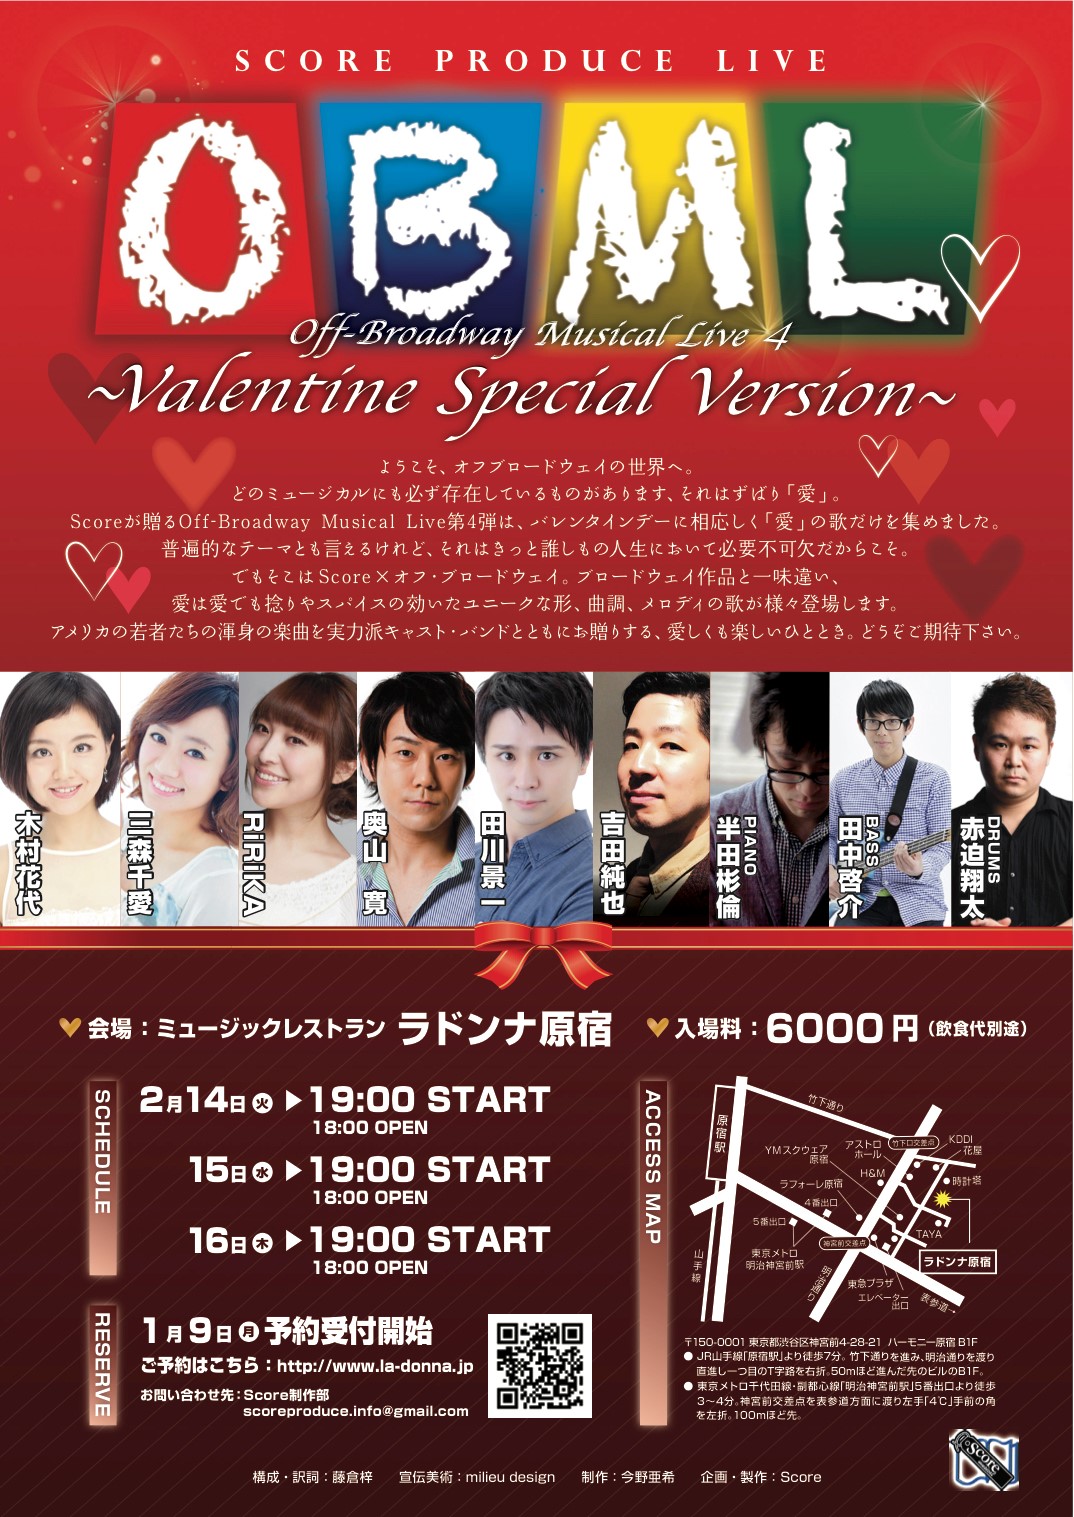 〜Score Produce LIVE〜 Off-Broadway MUSICAL LIVE４ 〜 Valentine Special Version〜